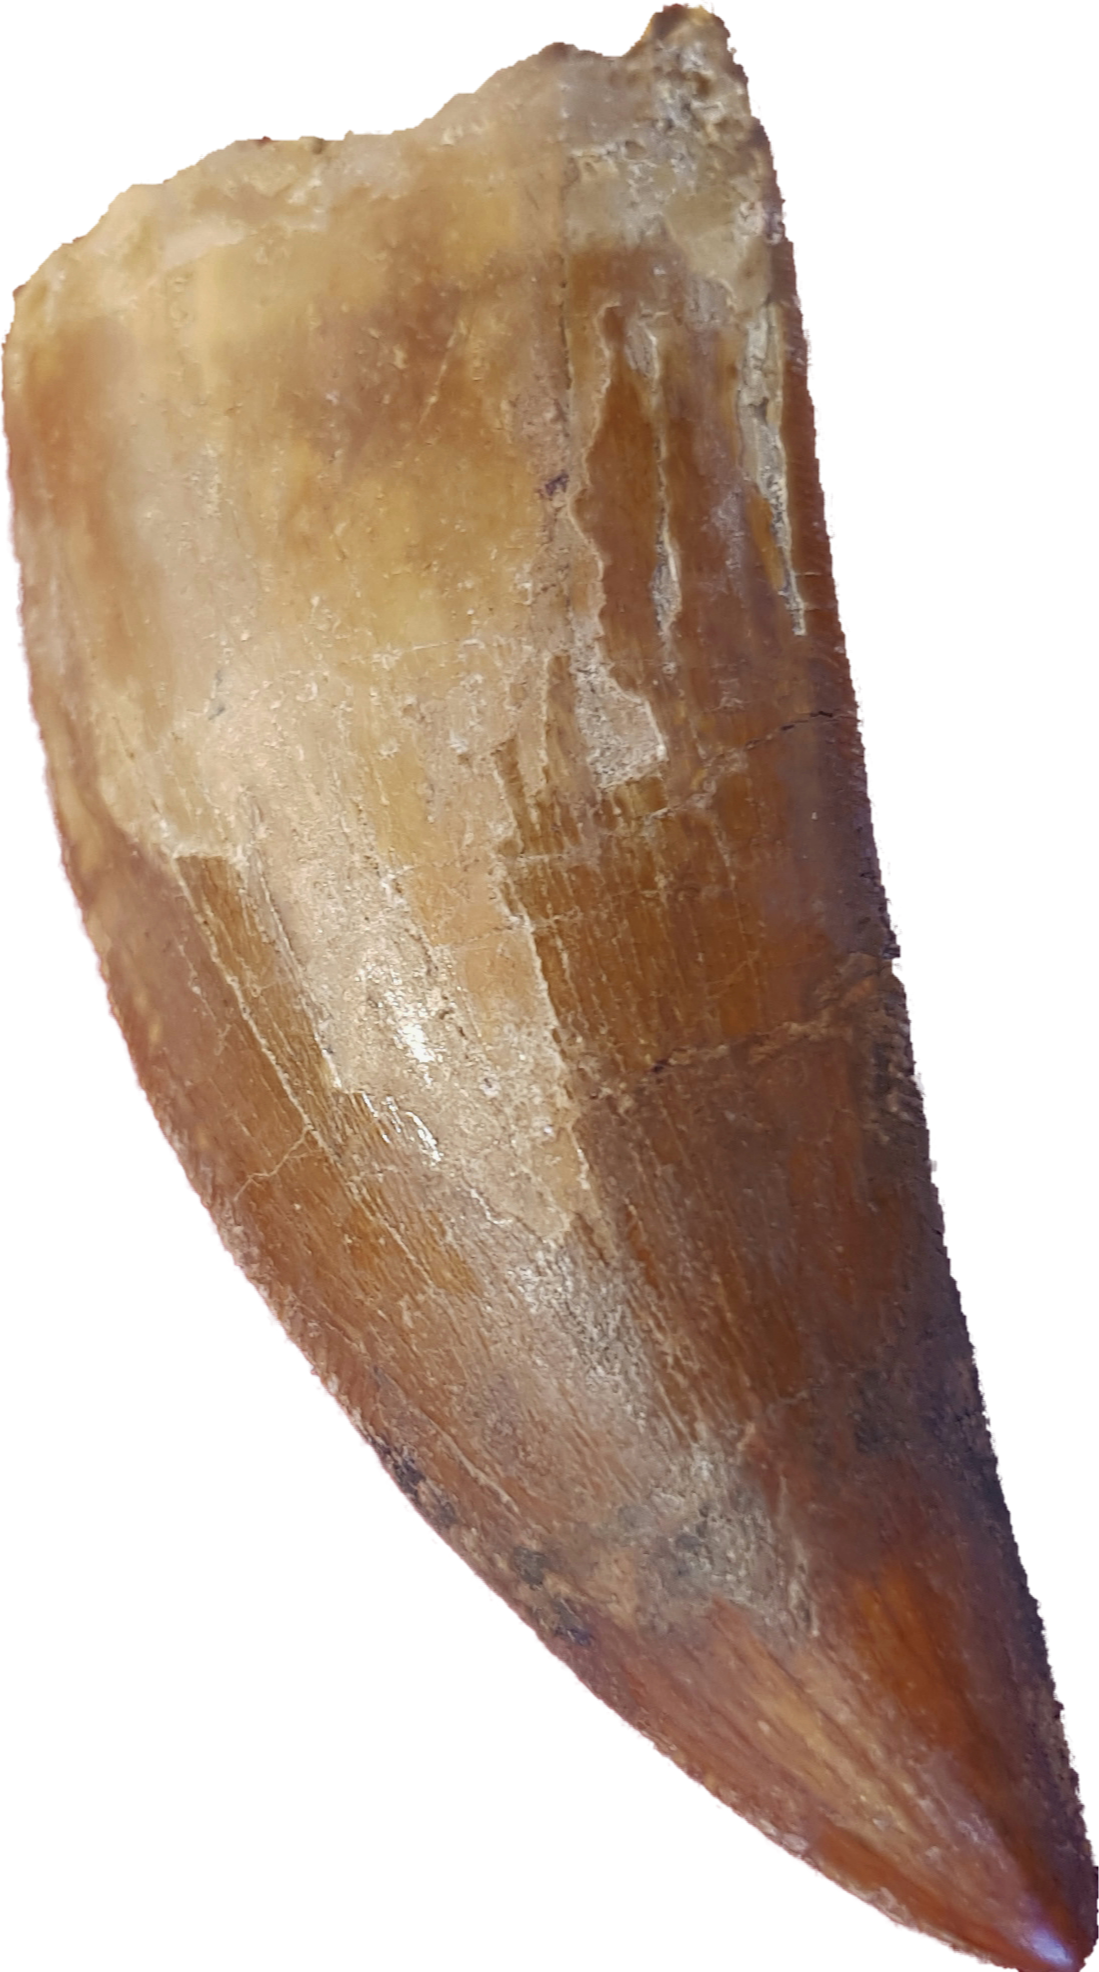 large Carcharadontasaurus tooth. sligh repair at the bottom of the image. seated edges, distinctive steak knife like tooth